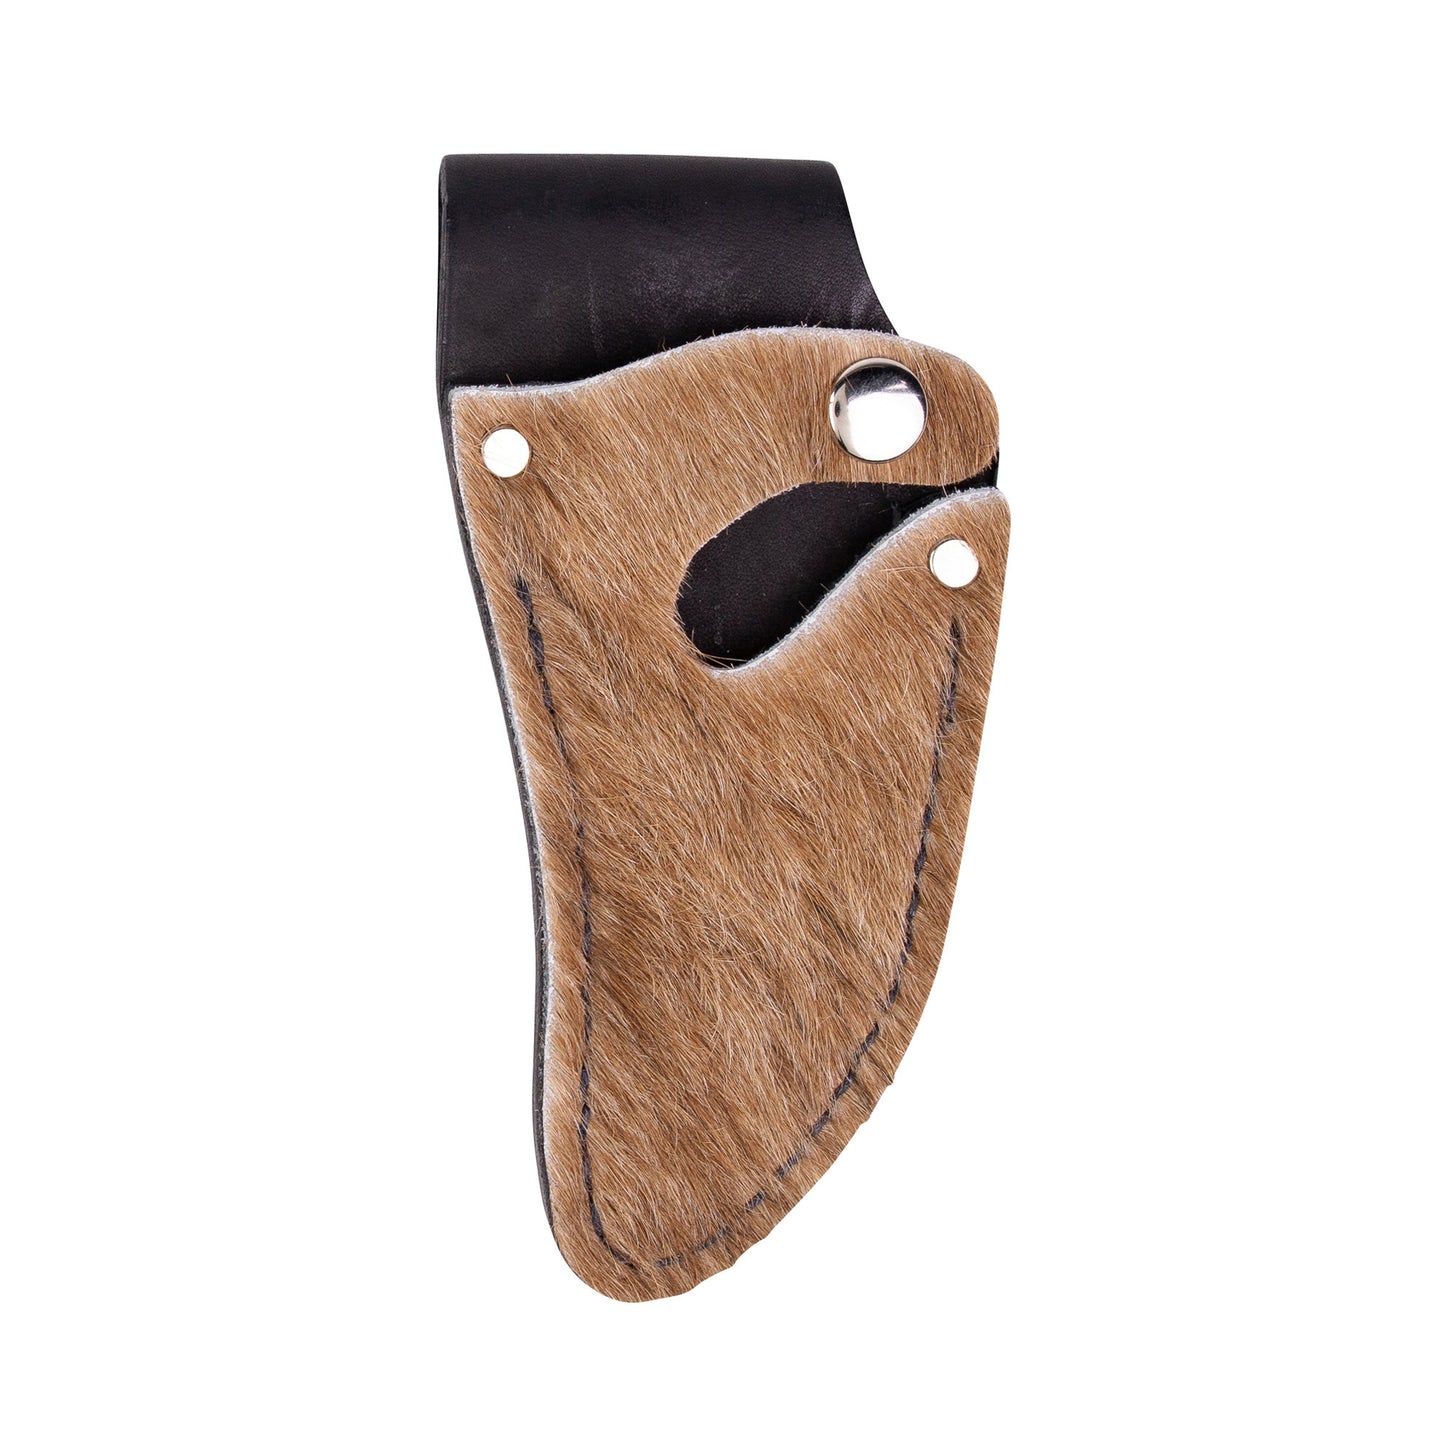 Convertible C7 - Replacement Leather Sheath